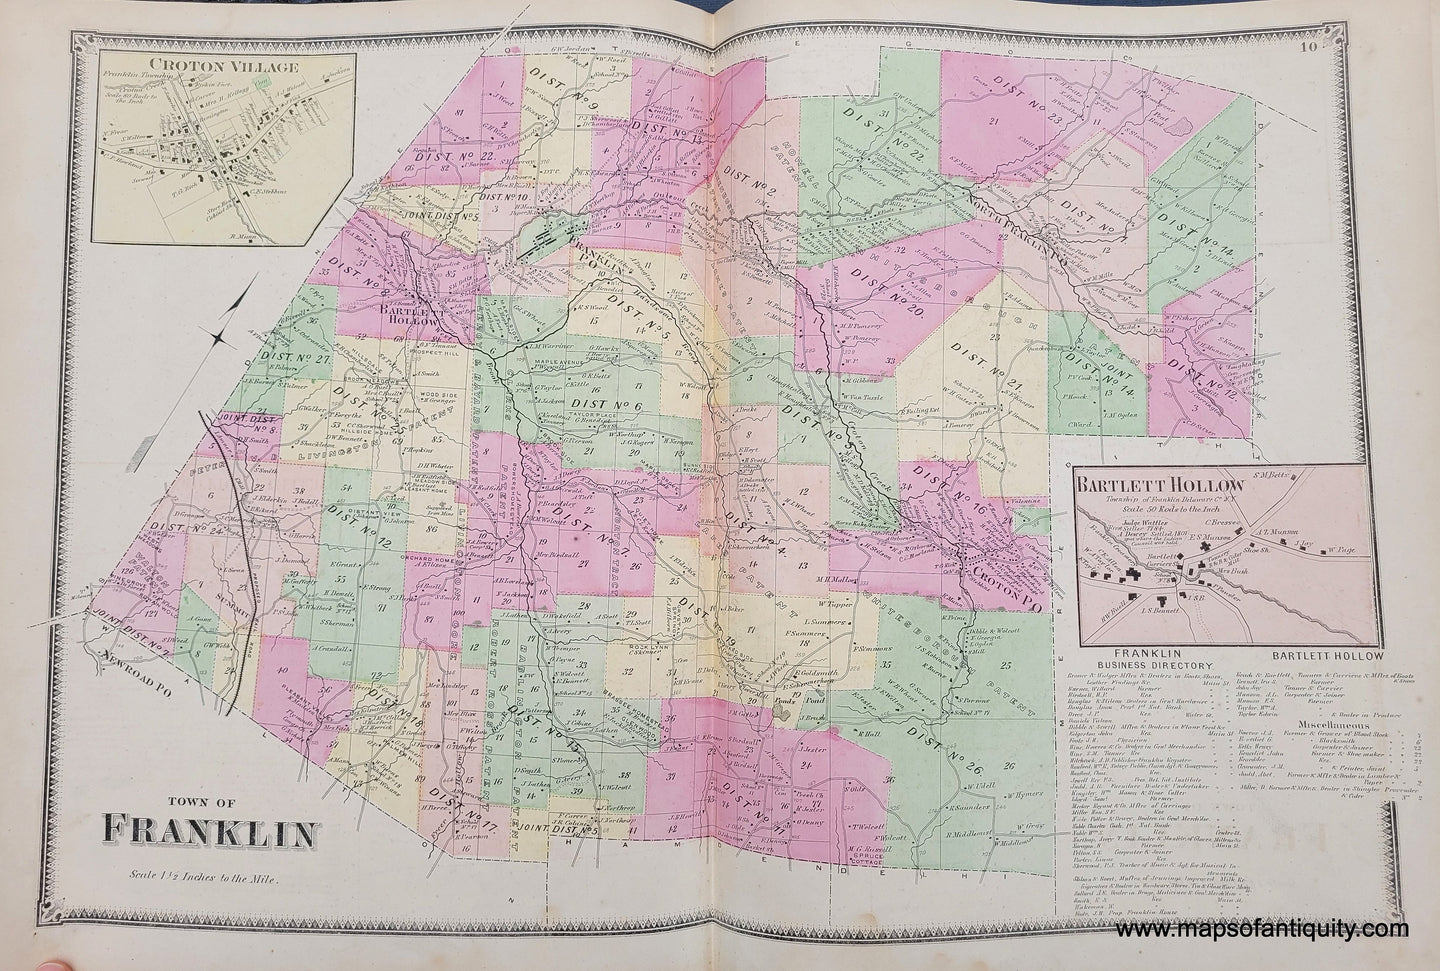 Genuine-Antique-Map-Town-of-Franklin-Delaware-Co-NY-1869-Beers-Ellis-Soule-Maps-Of-Antiquity